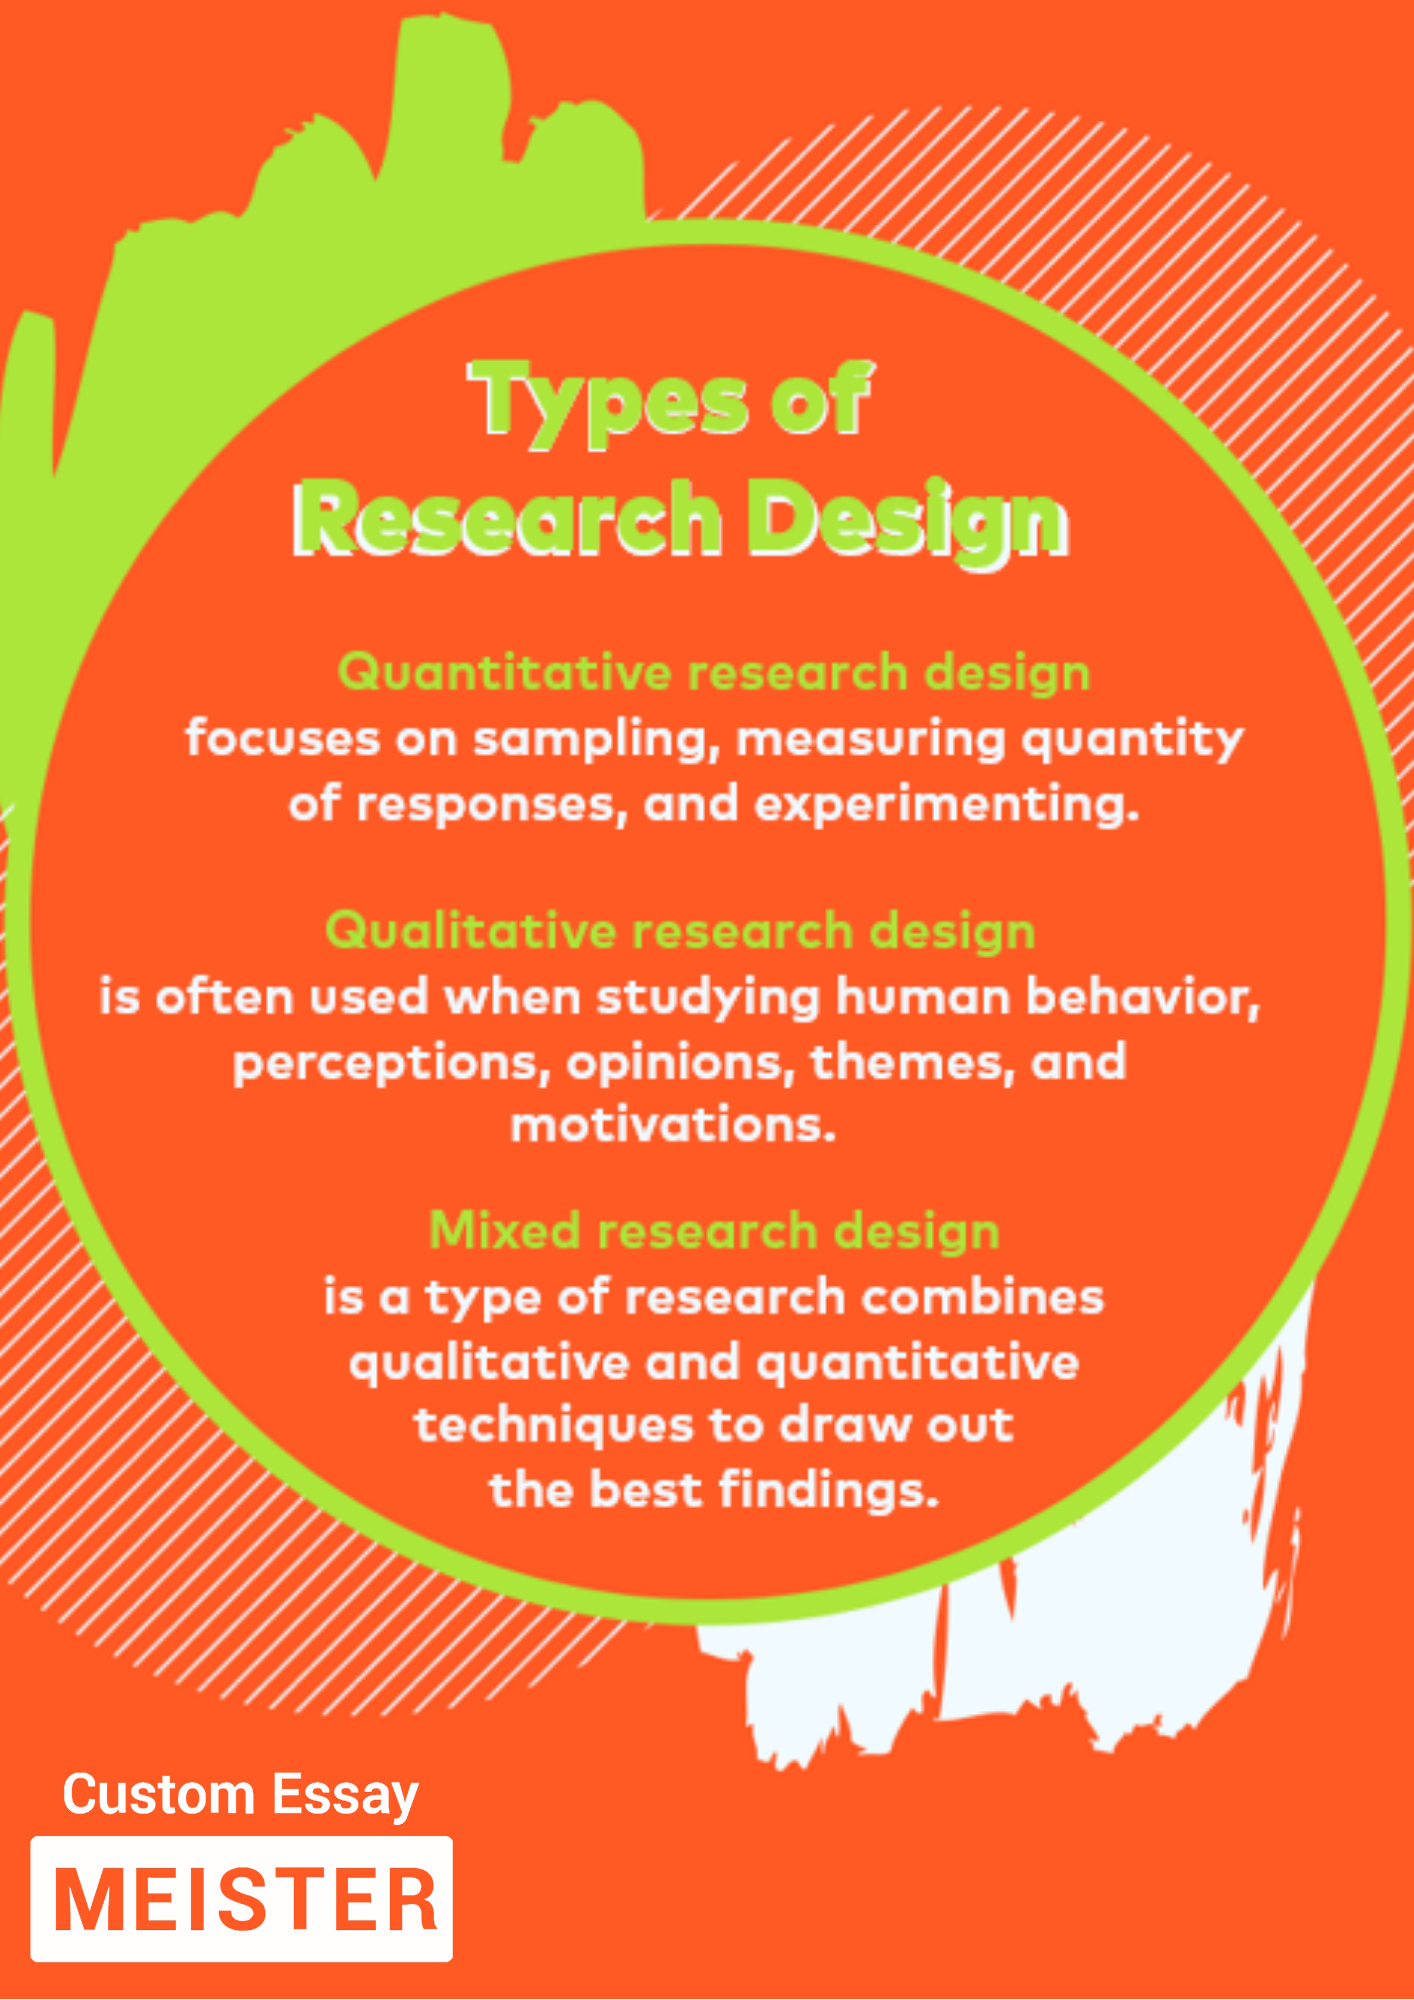 how to discuss a research design